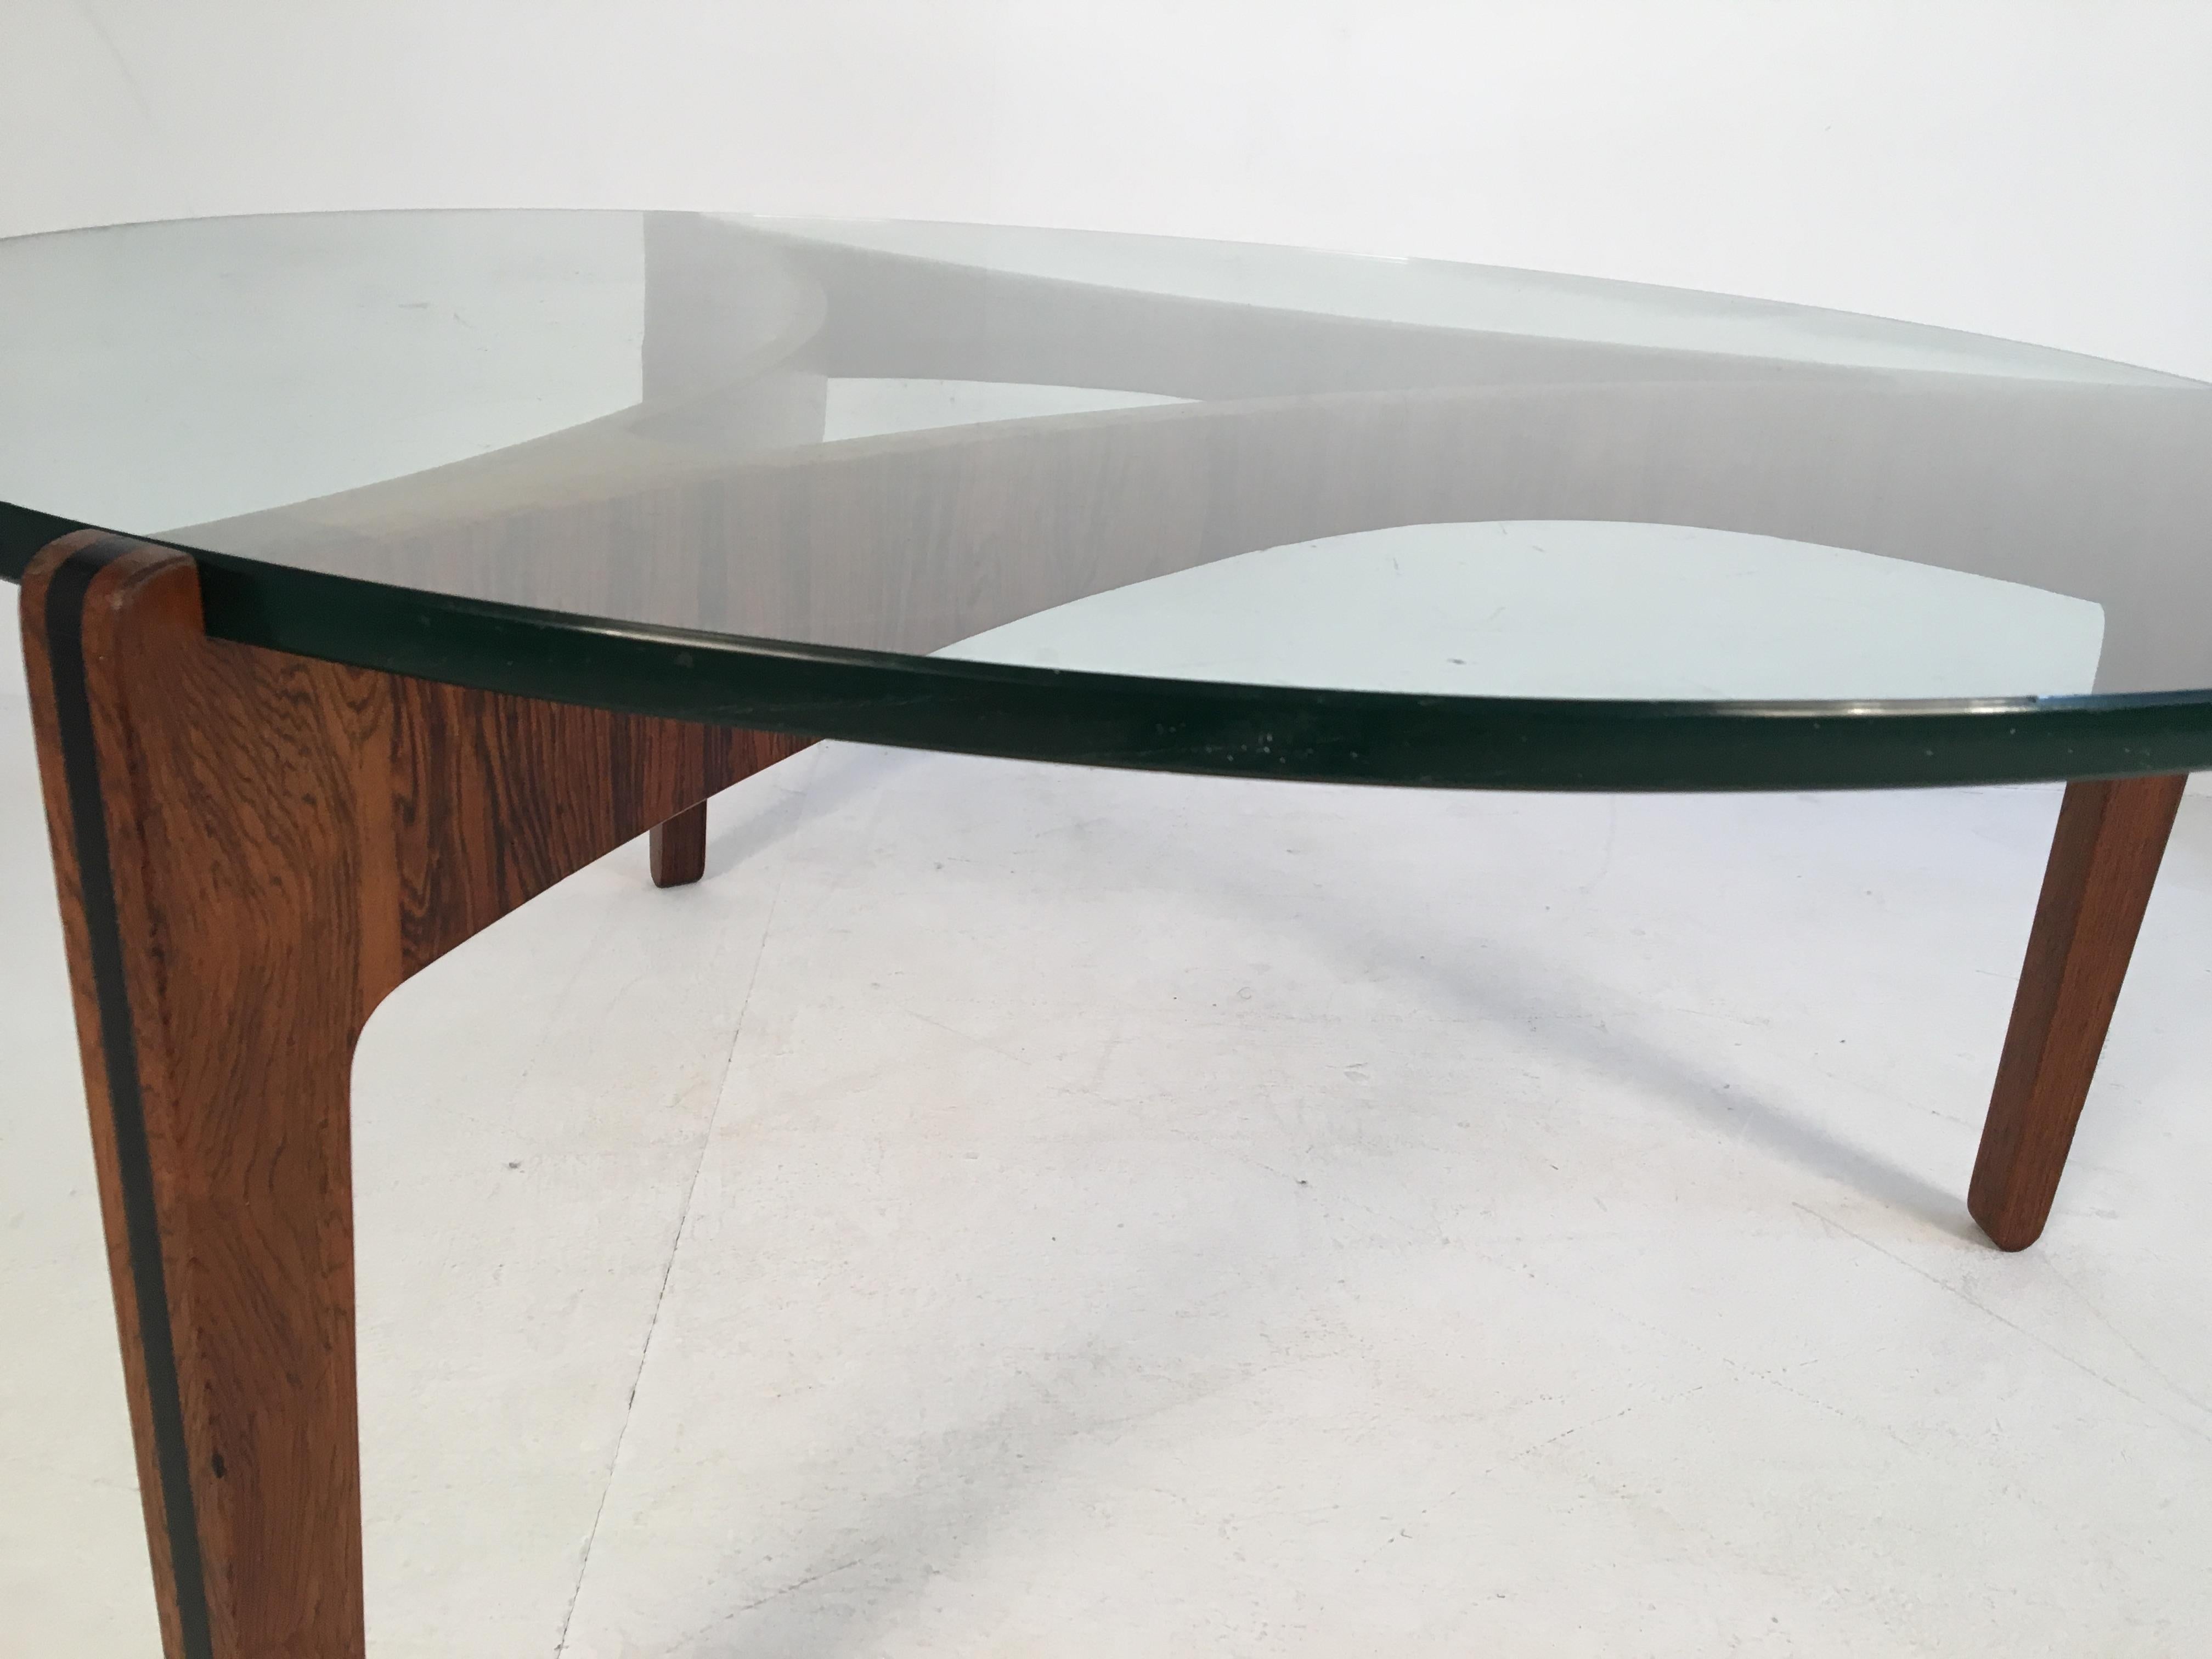 Mid-Century Modern Midcentury Rosewood and Glass Coffee Table by S. Ellekaer, Denmark, circa 1960